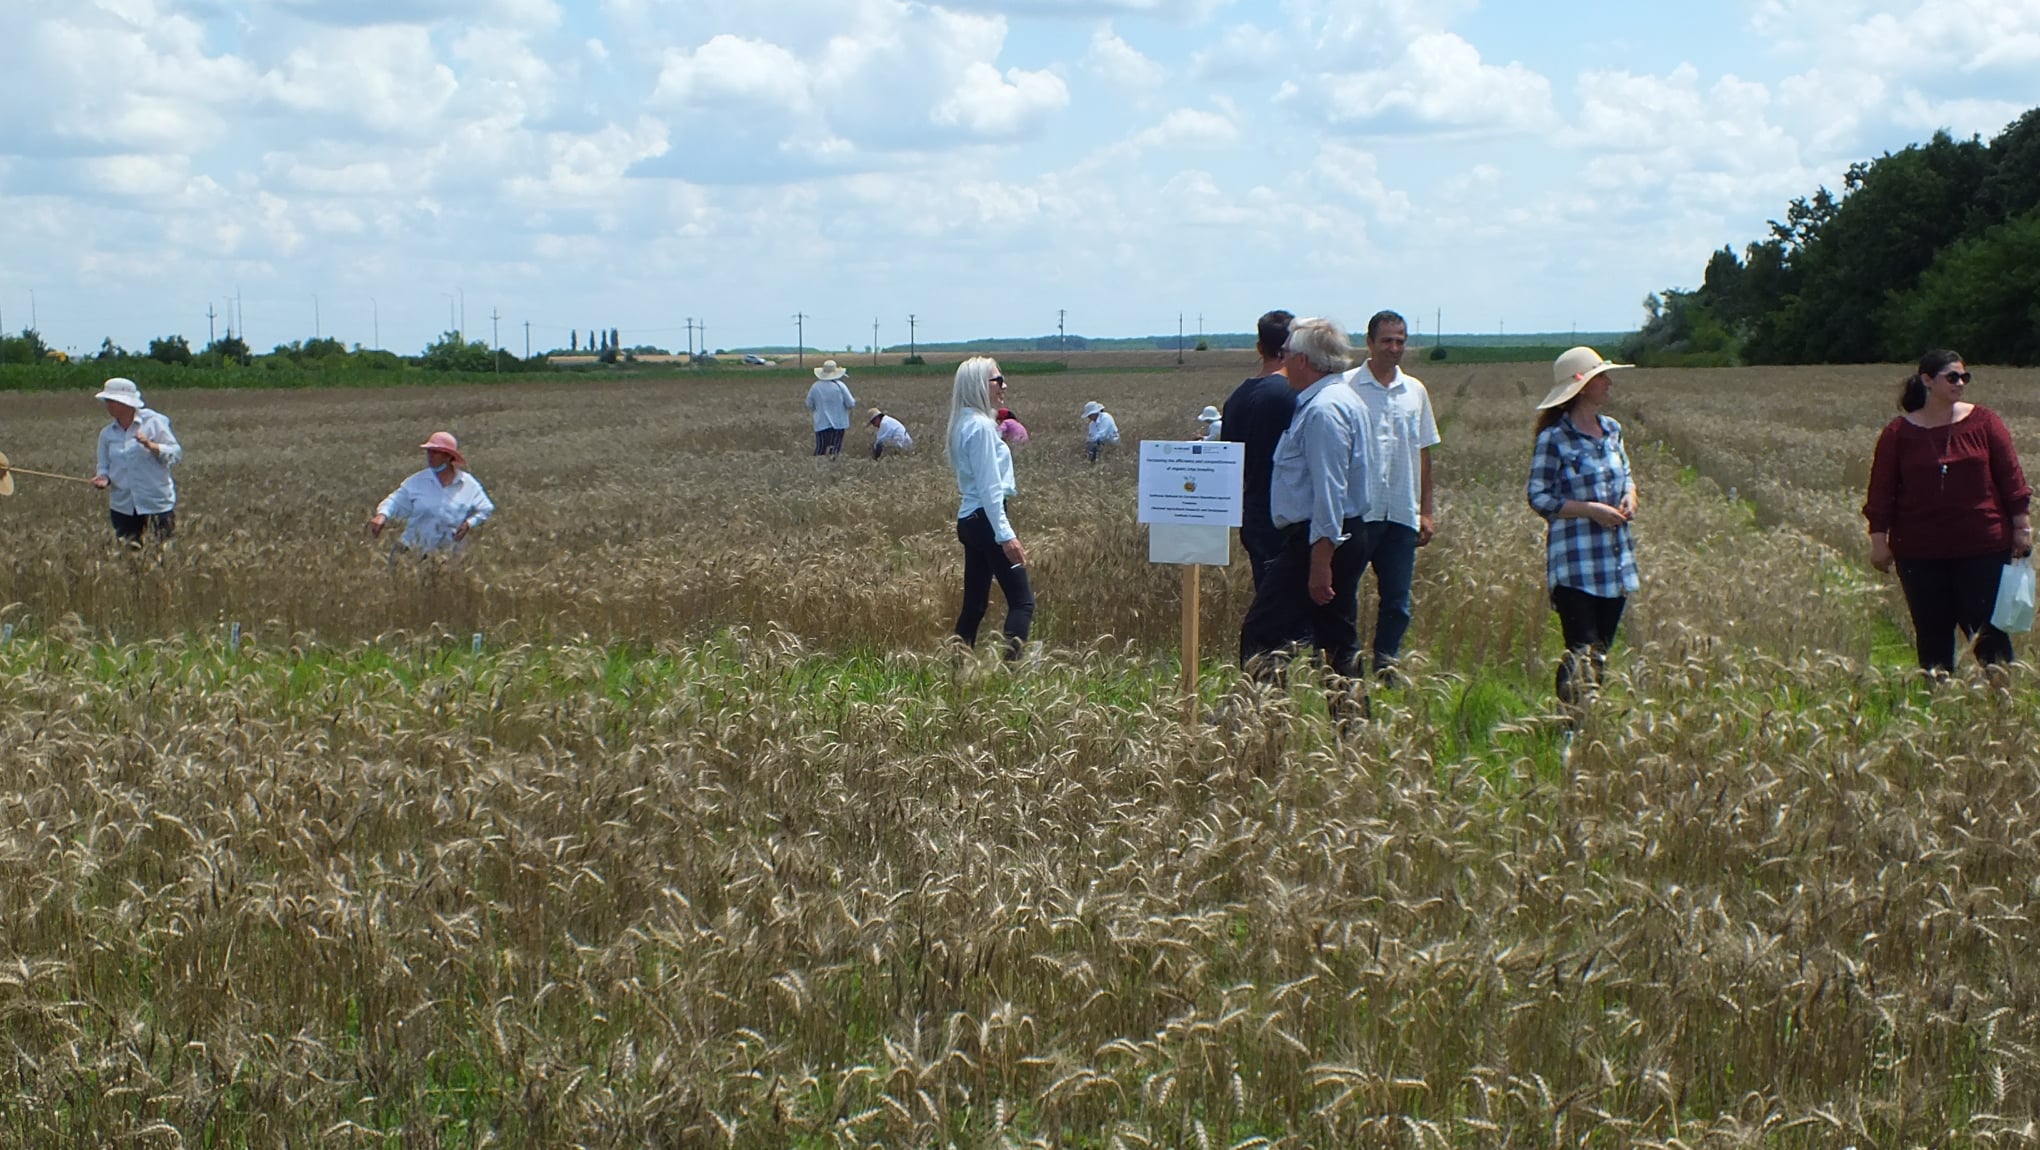 Farmers and policymakers visited ECOBREED’s fields in Romania